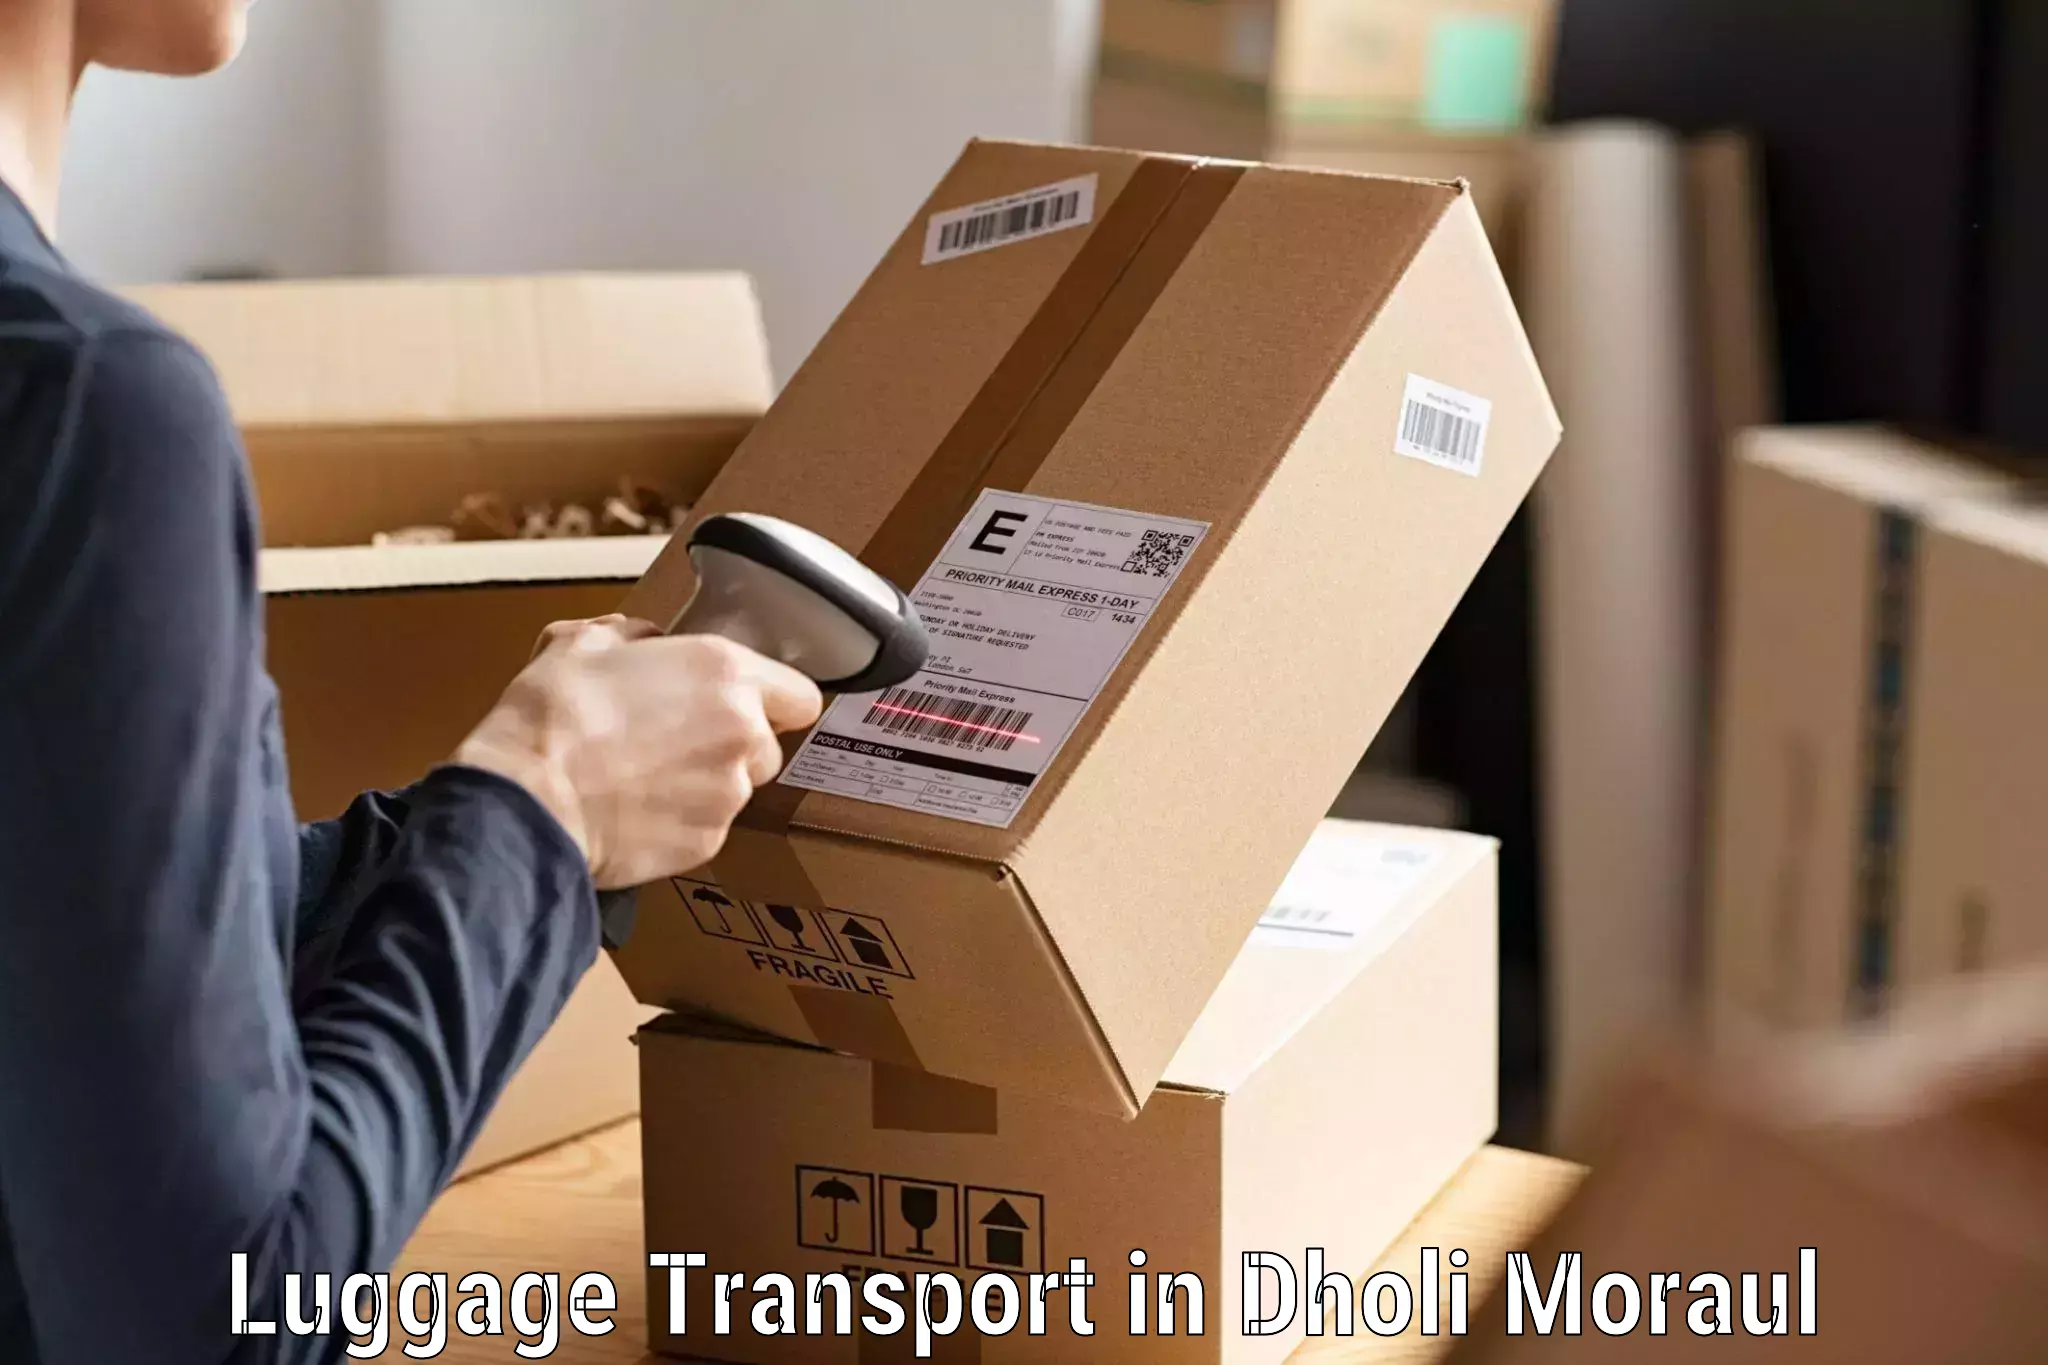 Luggage delivery news in Dholi Moraul